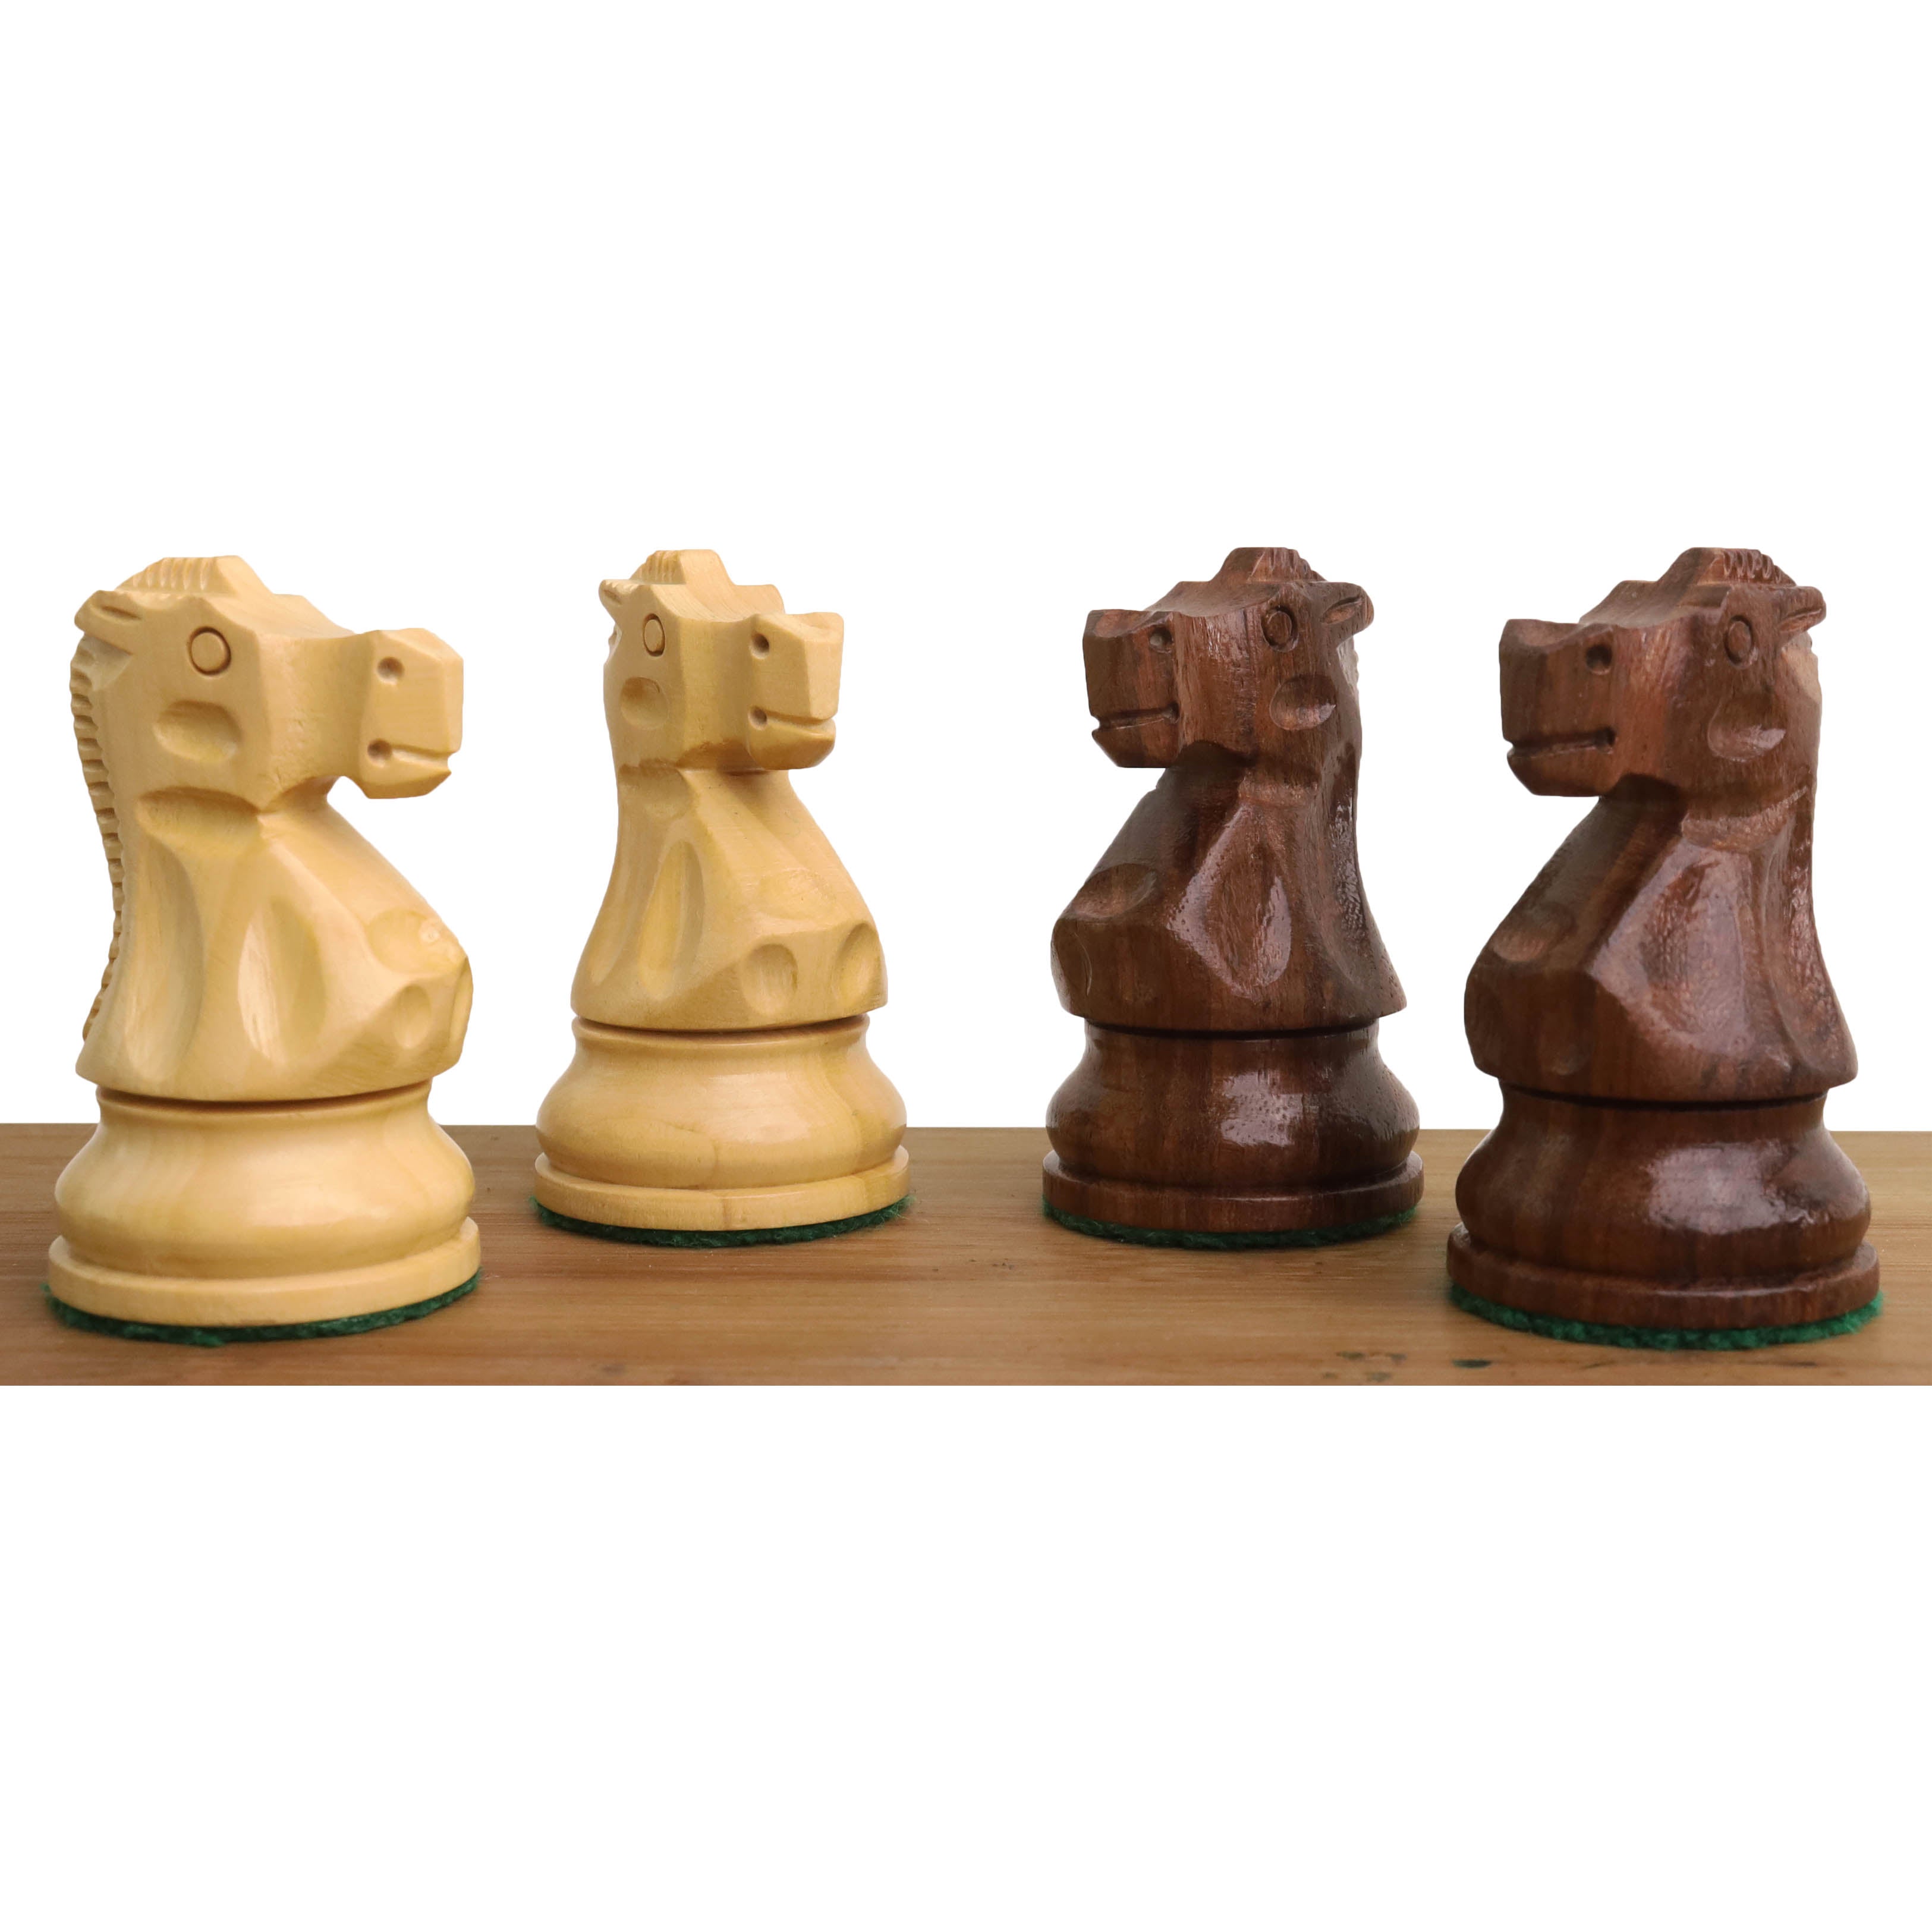 French Knight Series Rosewood Staunton Chess Pieces 3.25 Inches